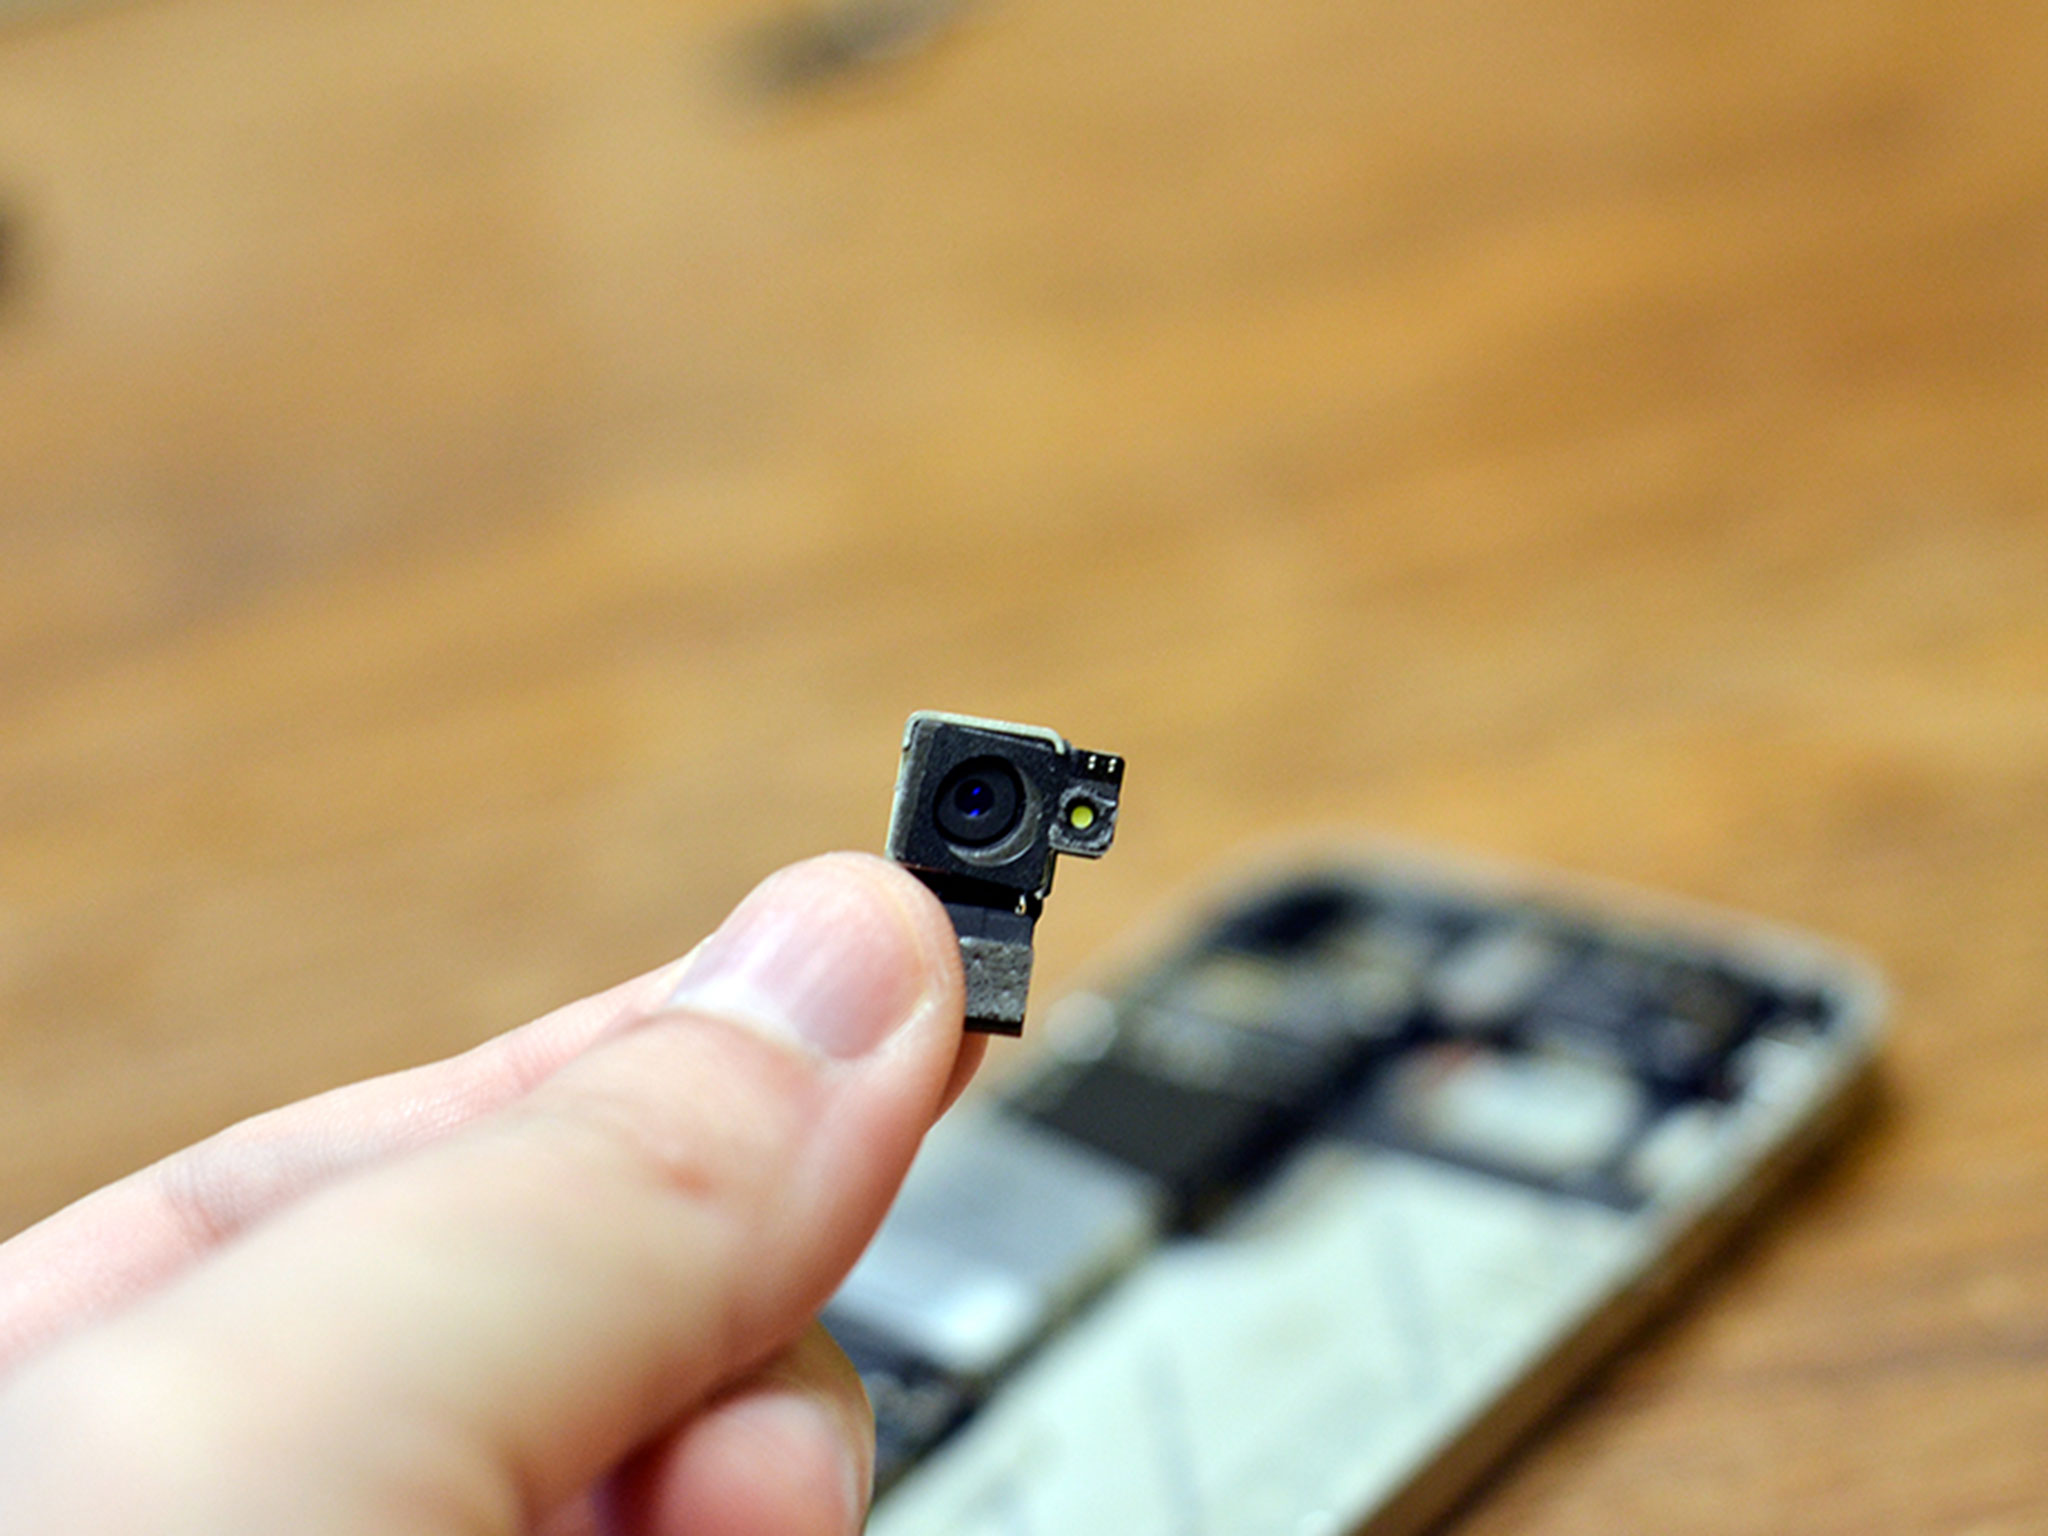 How to replace rear camera in an iPhone 4s